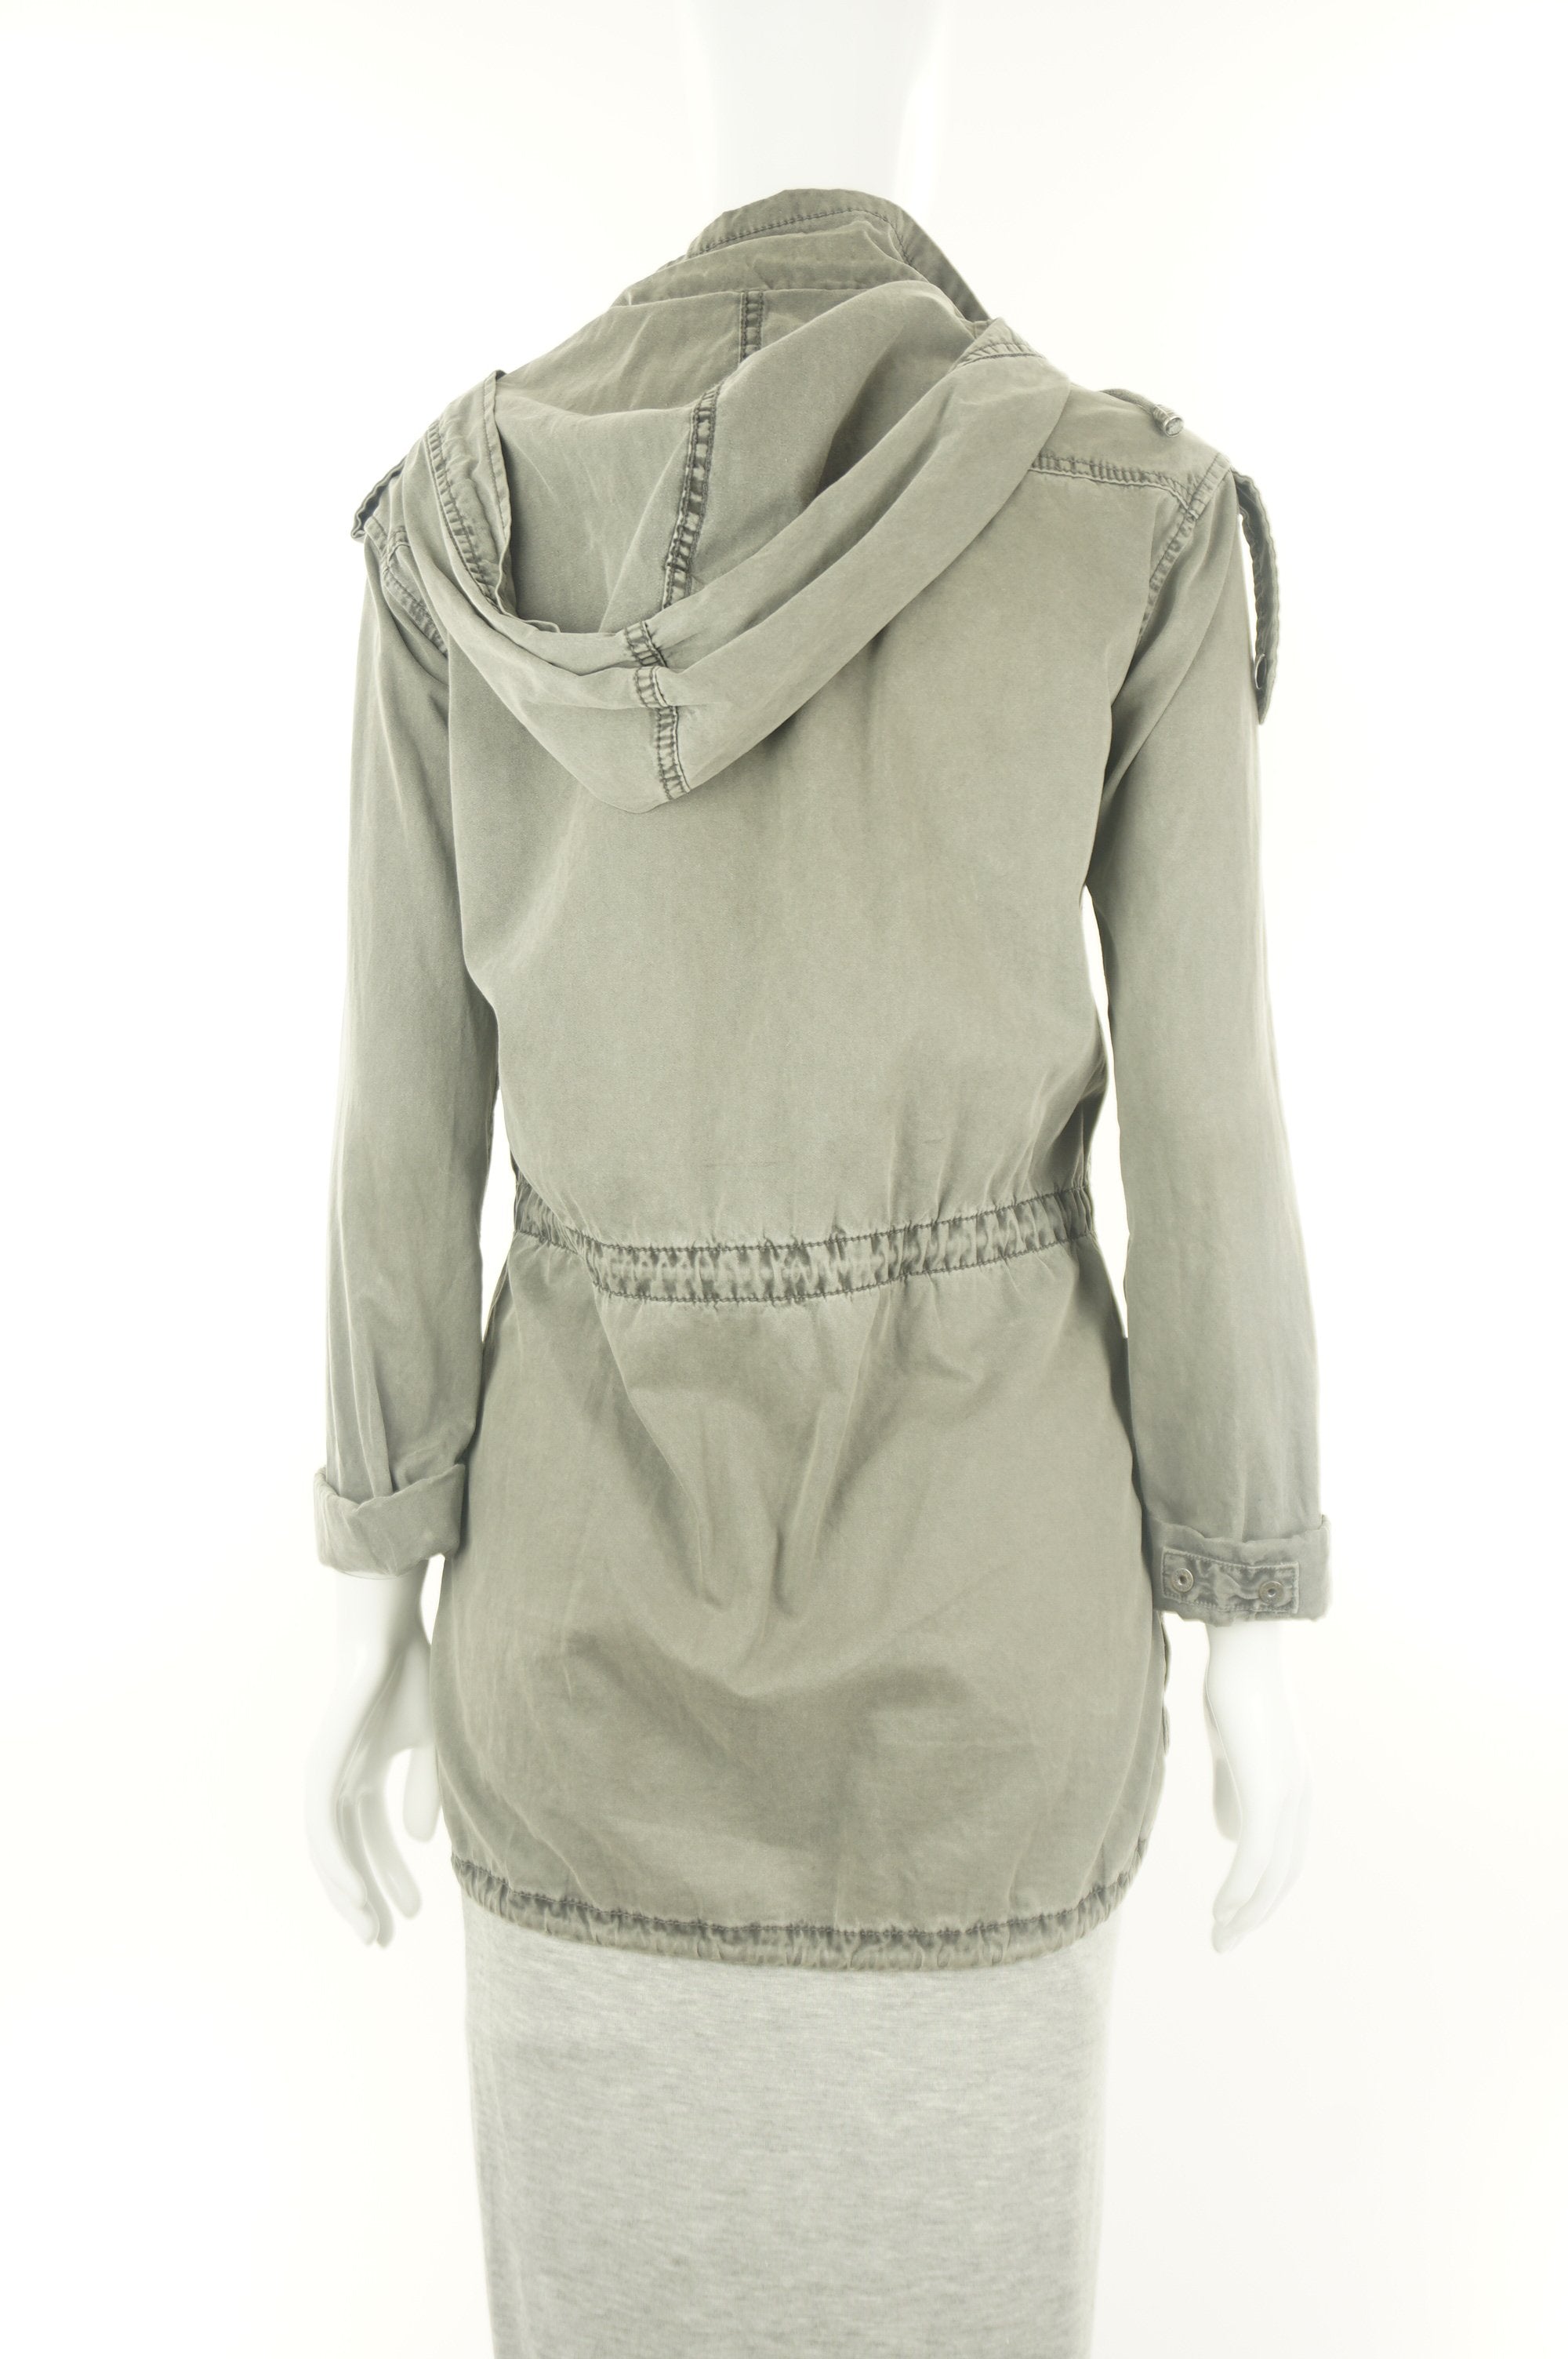 Talula Thin Jacket, Spring or summer weather jacket, Green, 100% cotton, 